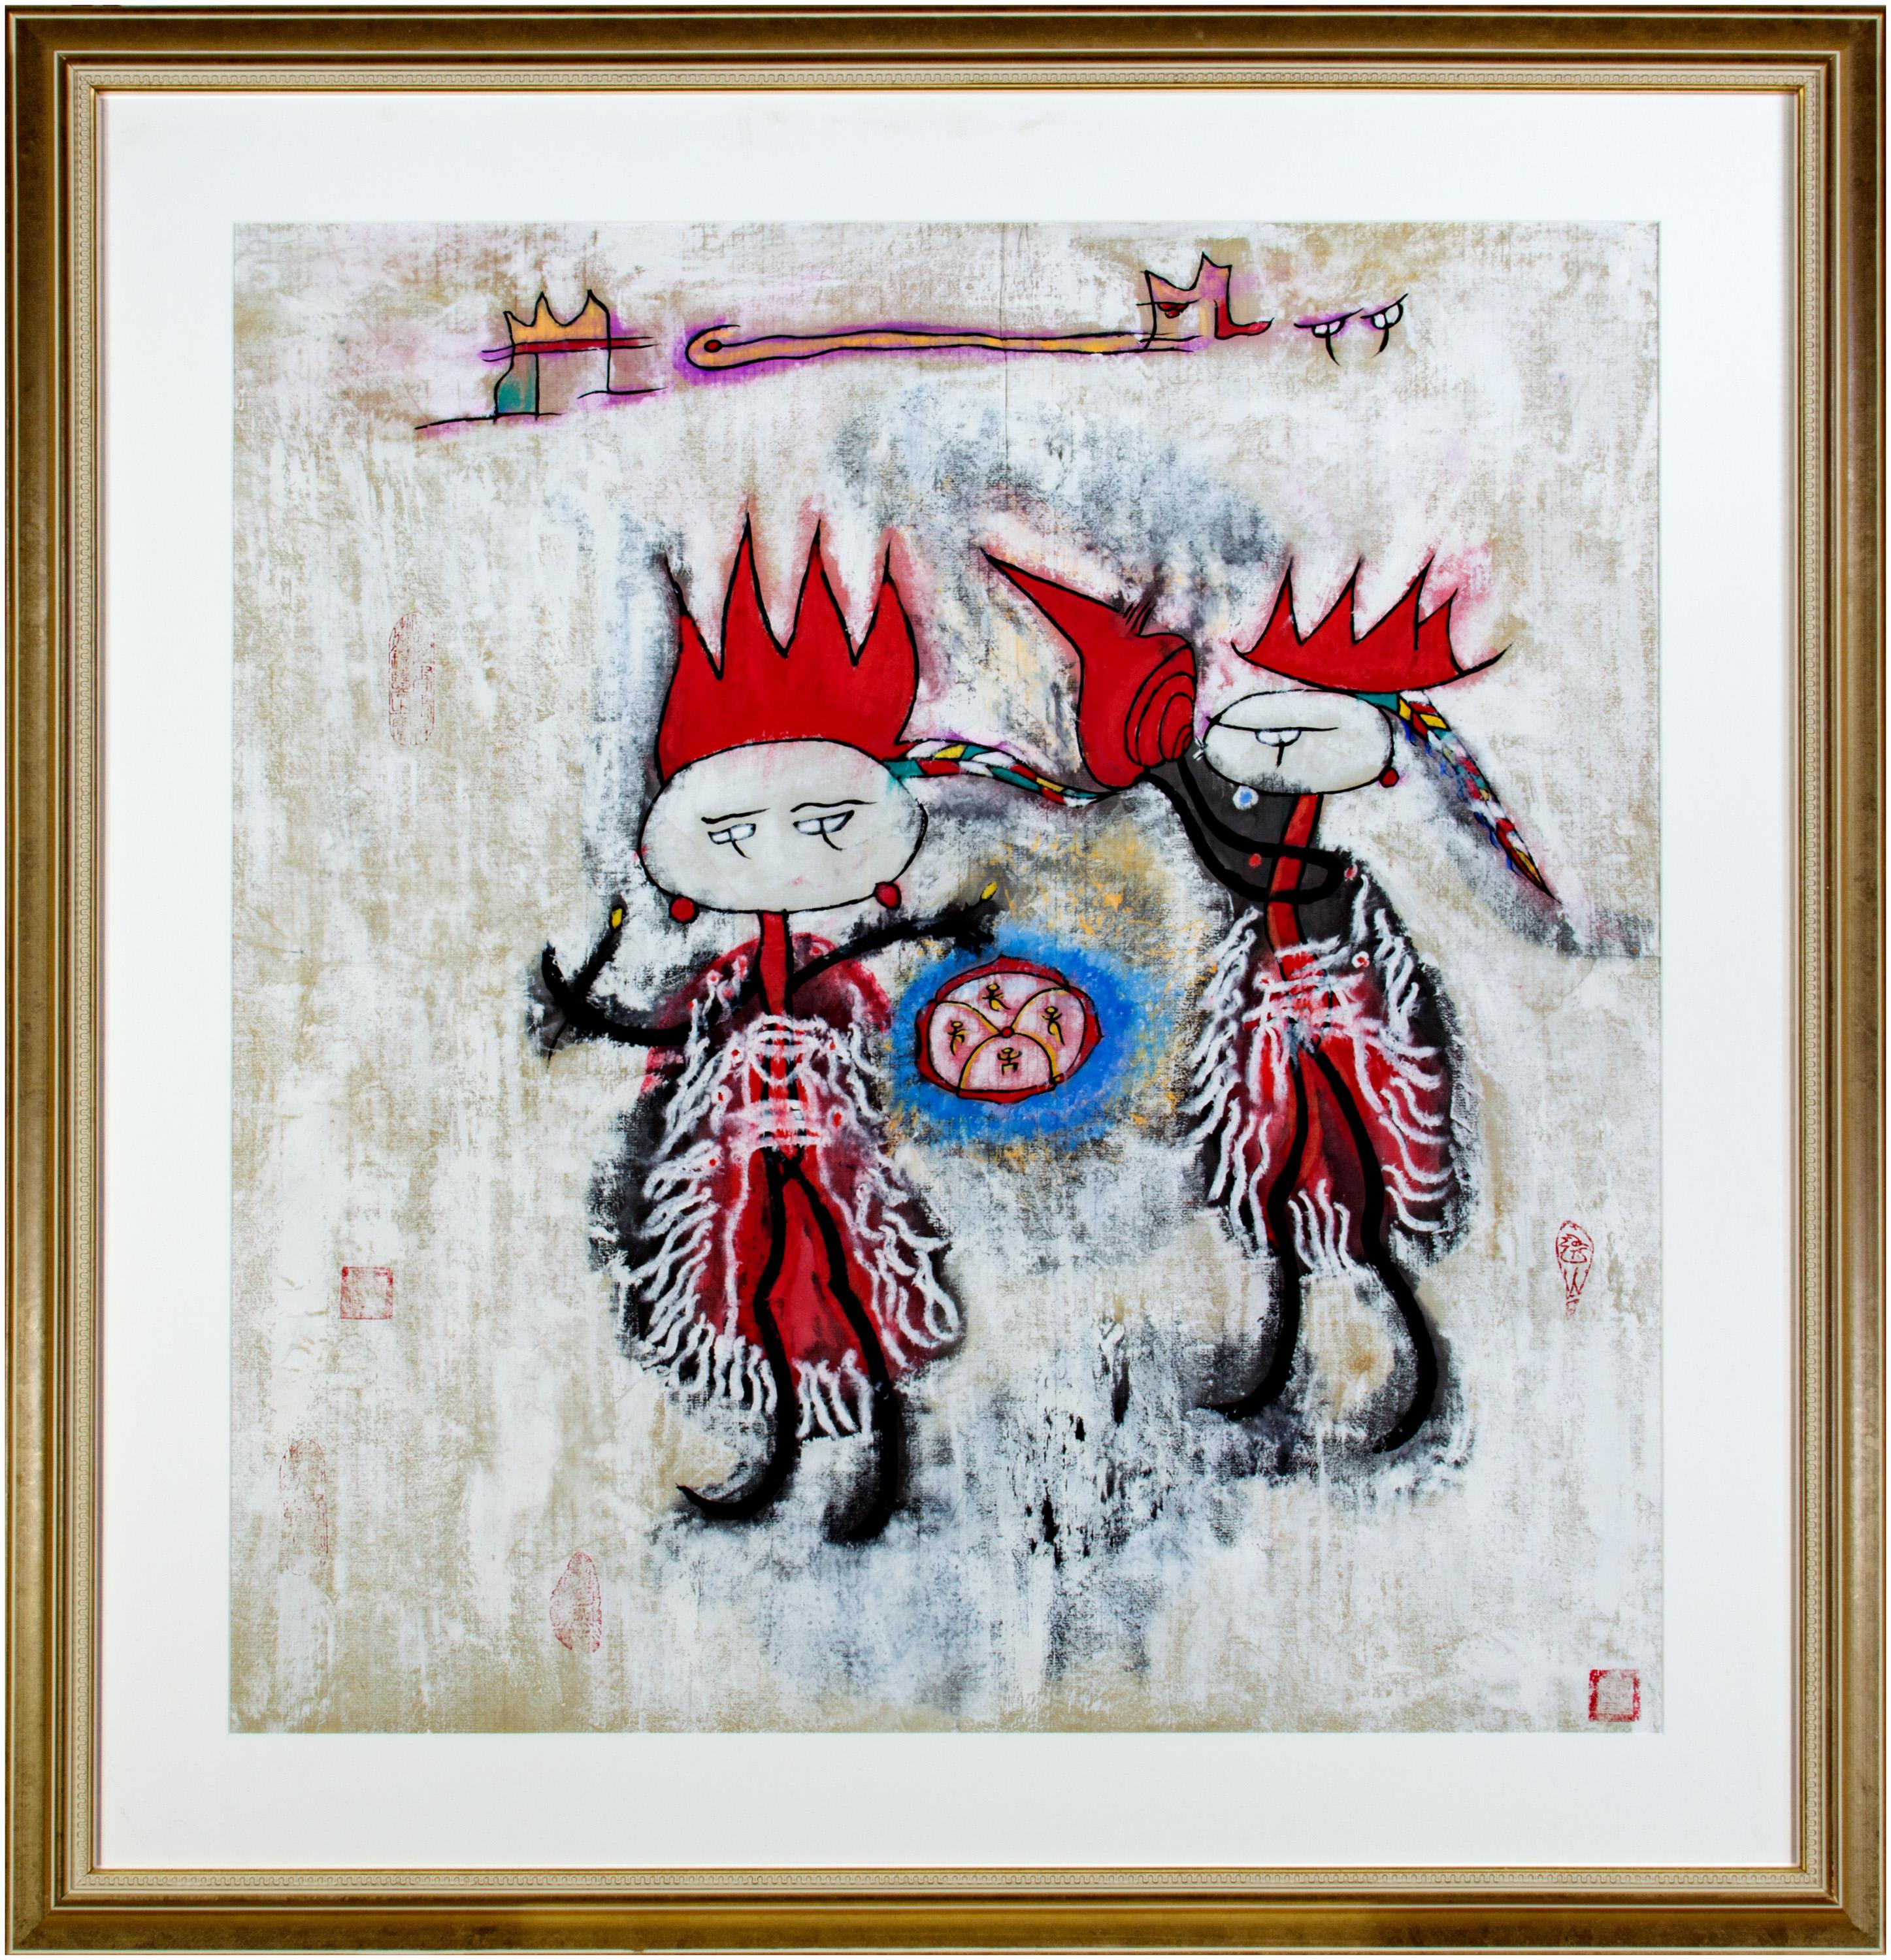 "The Spirit Song of Mind, " Mixed Media with Stamp Signature - Mixed Media Art by Xiao Ming